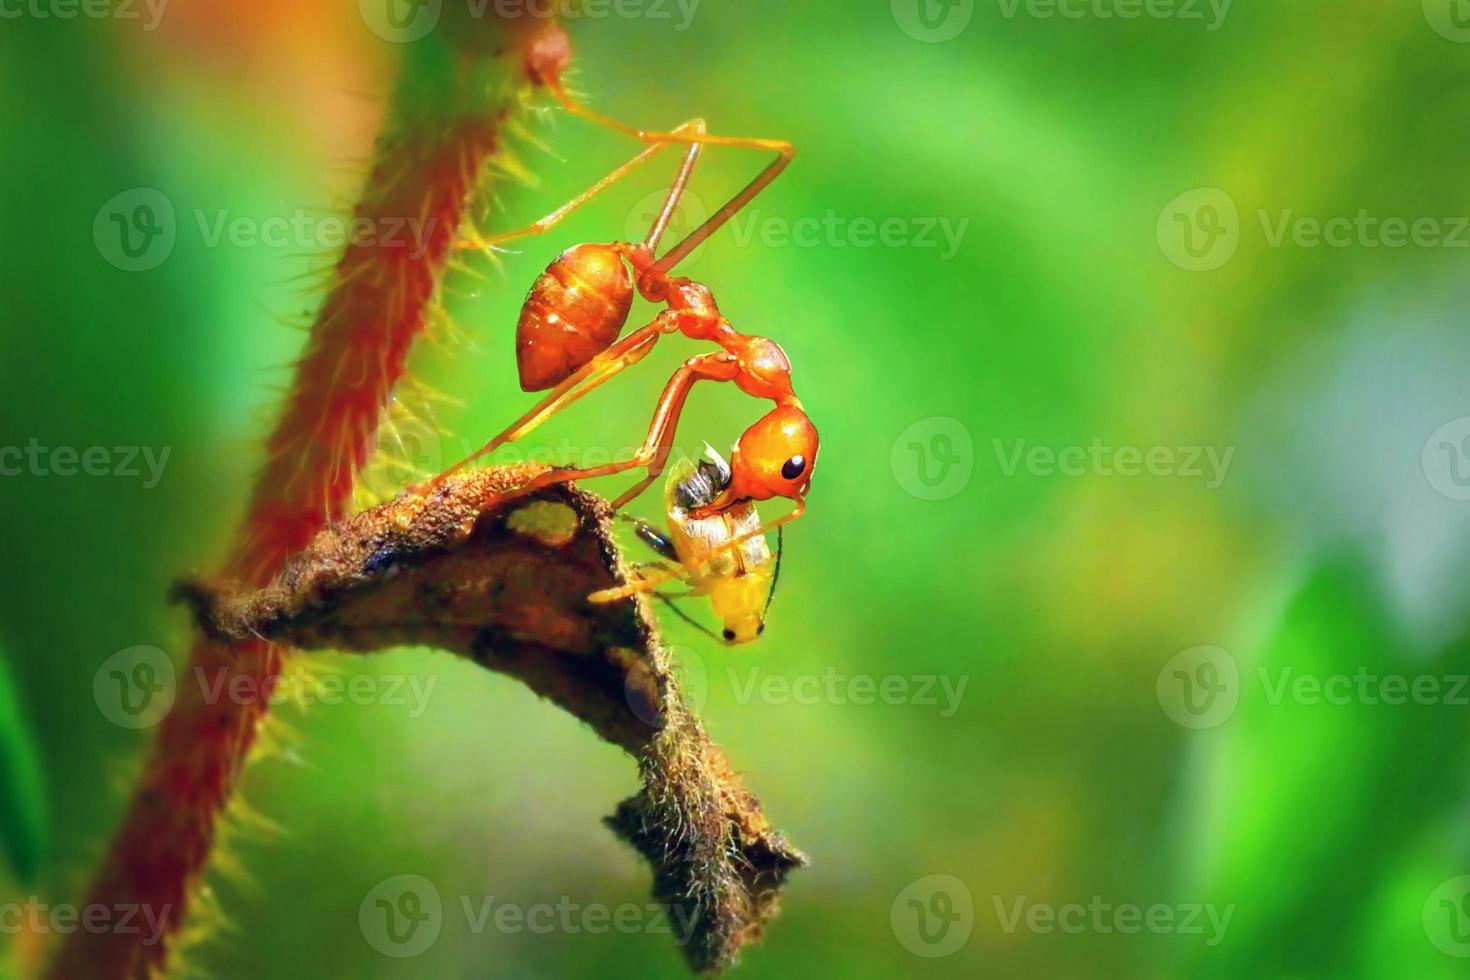 Ant to move their food on a branch. photo